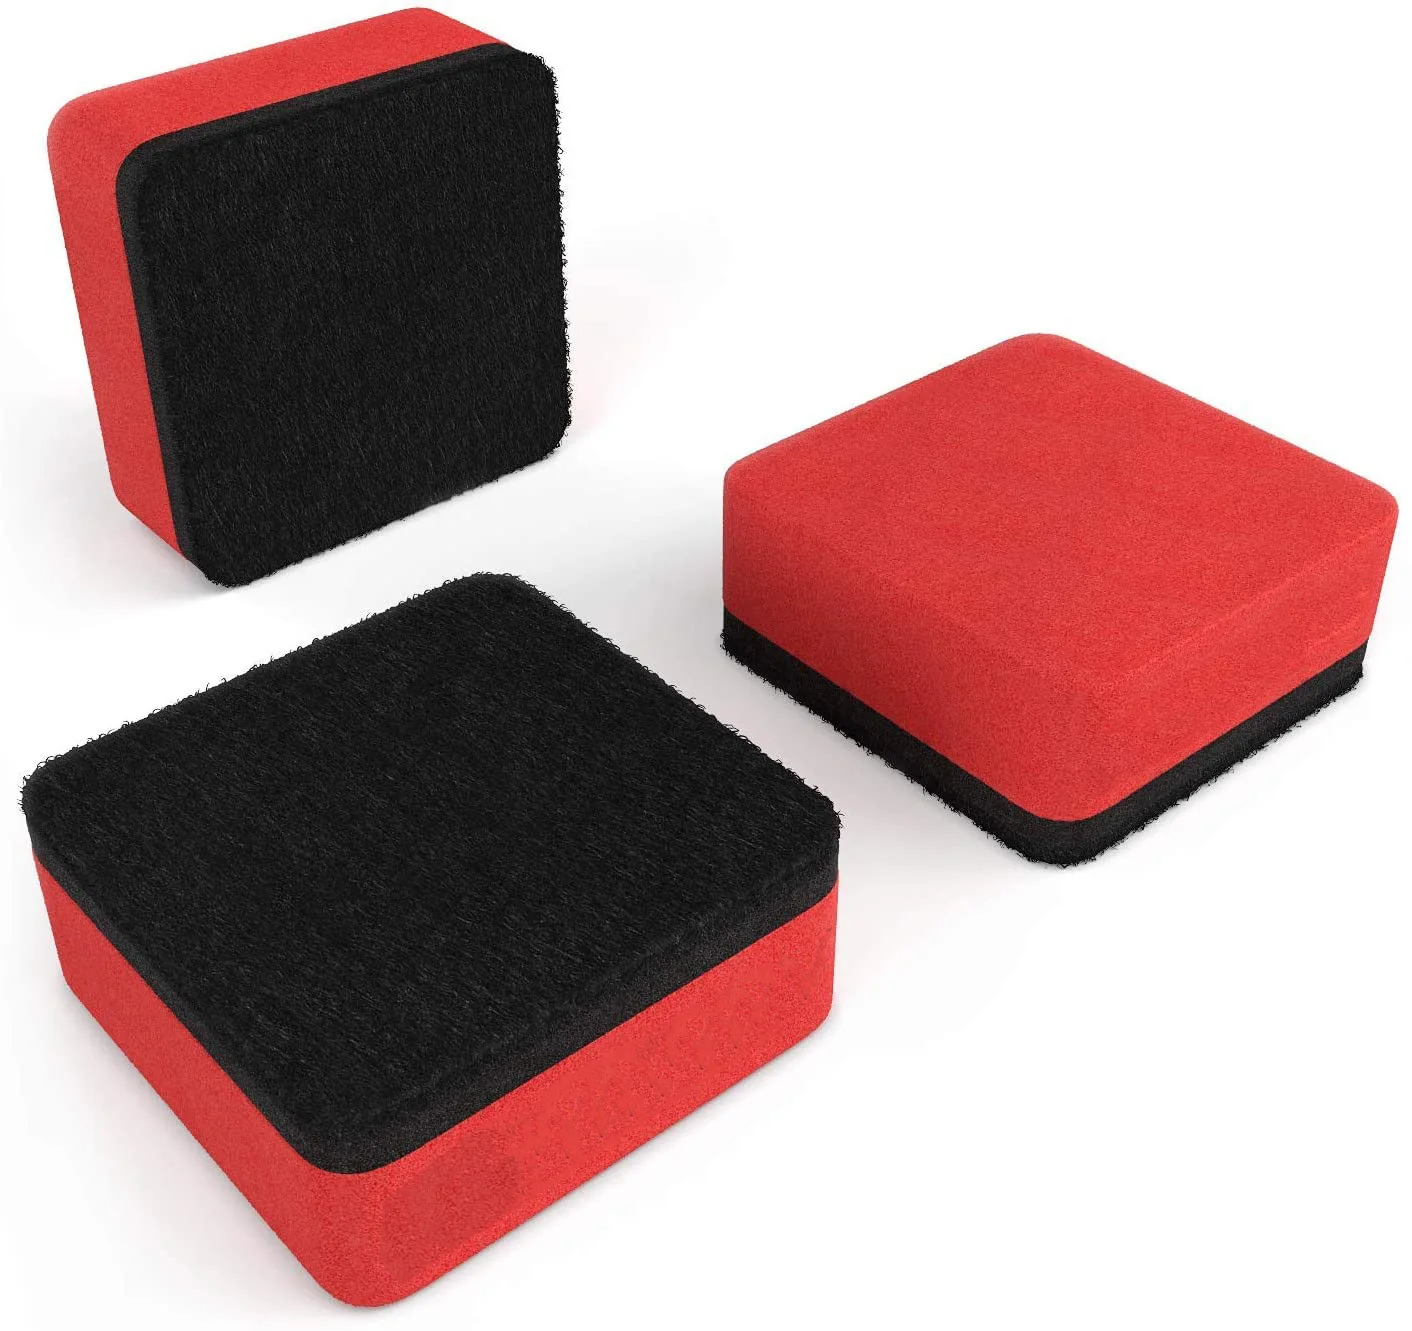 Small Magnetic Whiteboard Dry Erasers, Perfect for the Office, Home, or Classroom